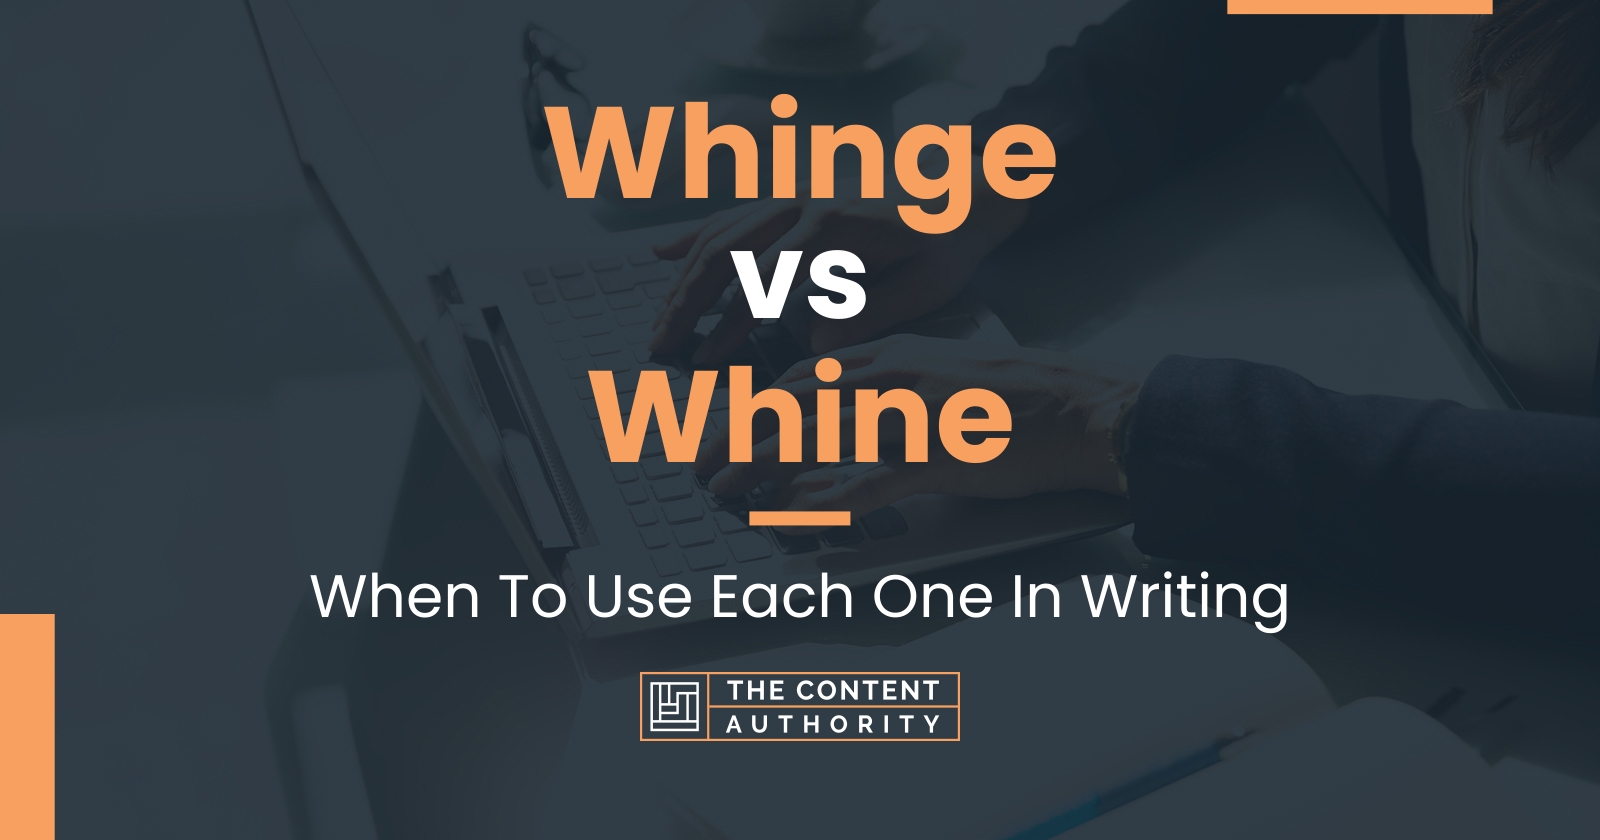 Whinge vs Whine: When To Use Each One In Writing